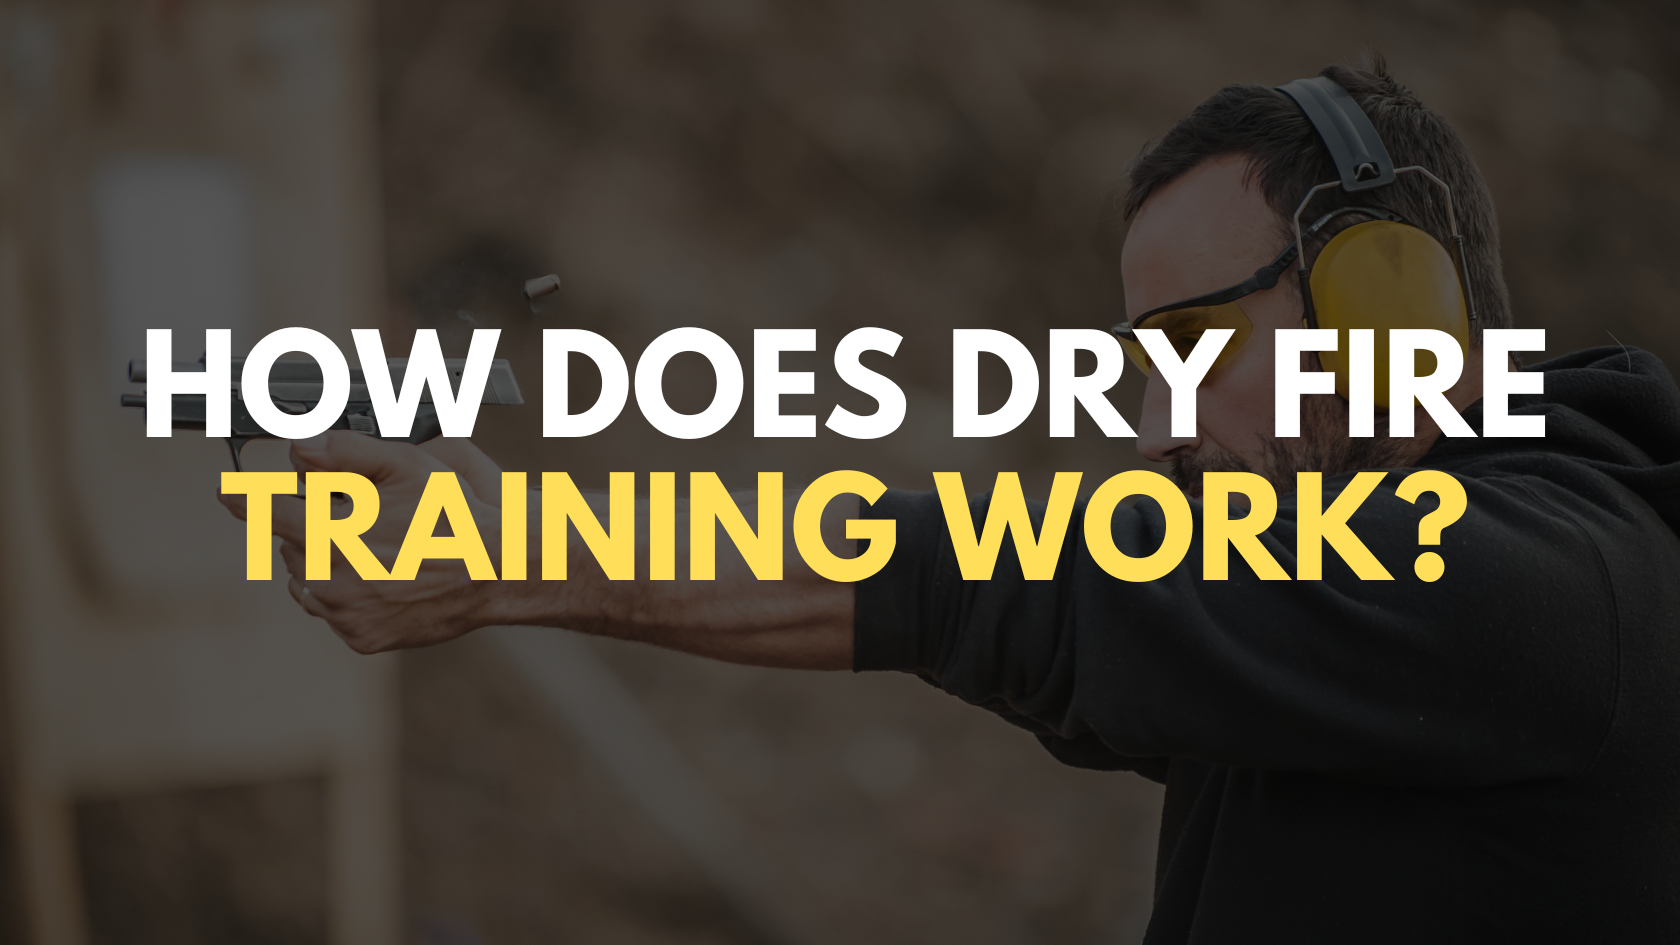 How does dry fire training work?